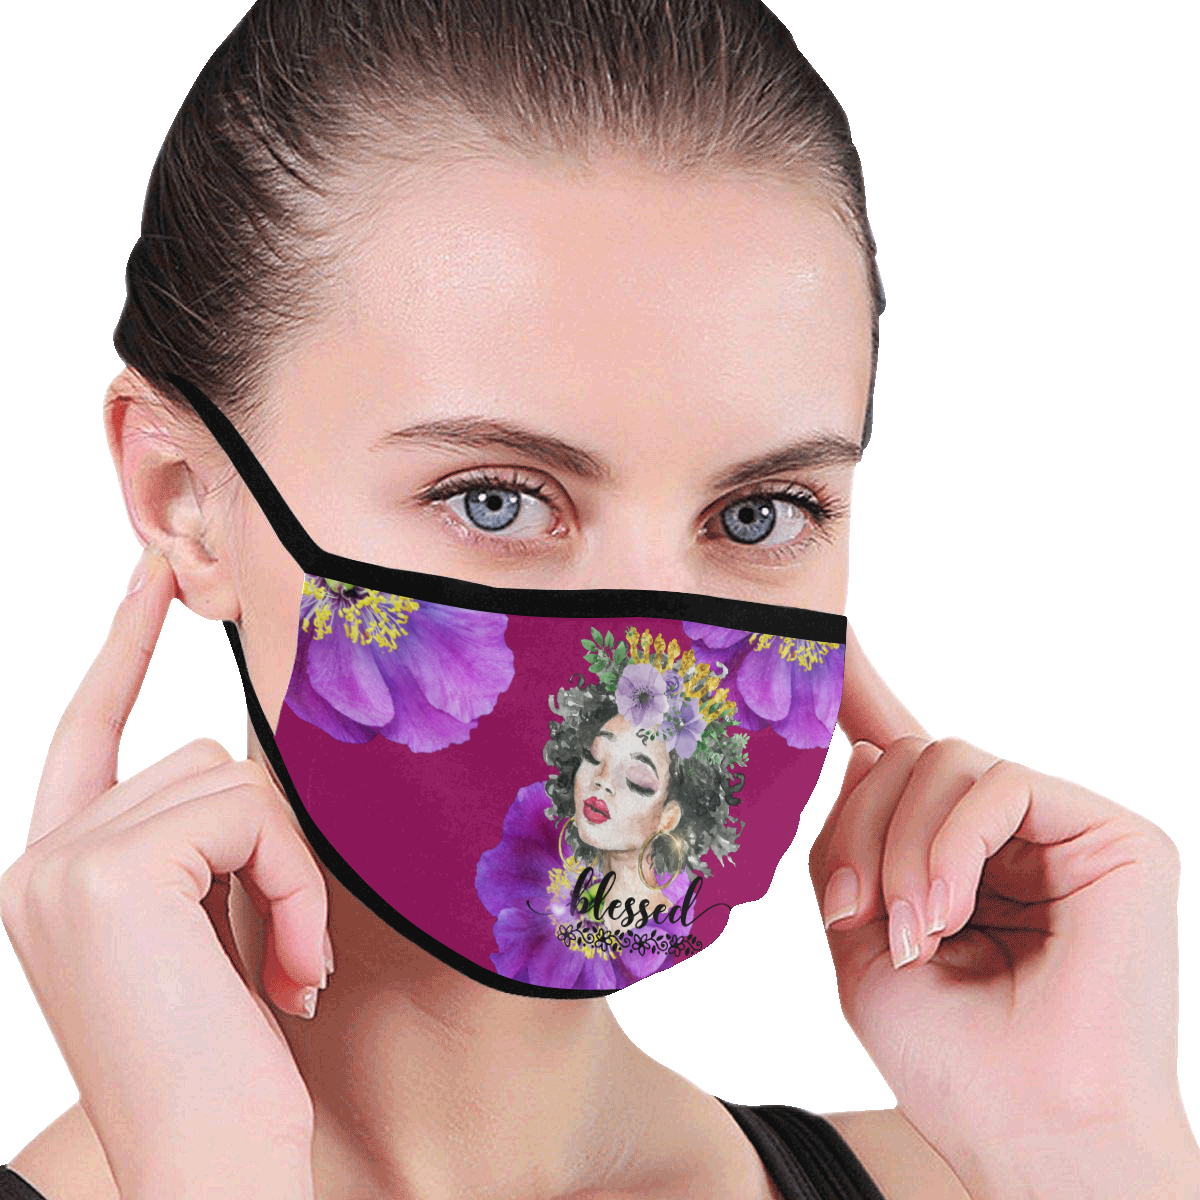 Fairlings Delight's The Word Collection- Blessed 53086a8 Mouth Mask